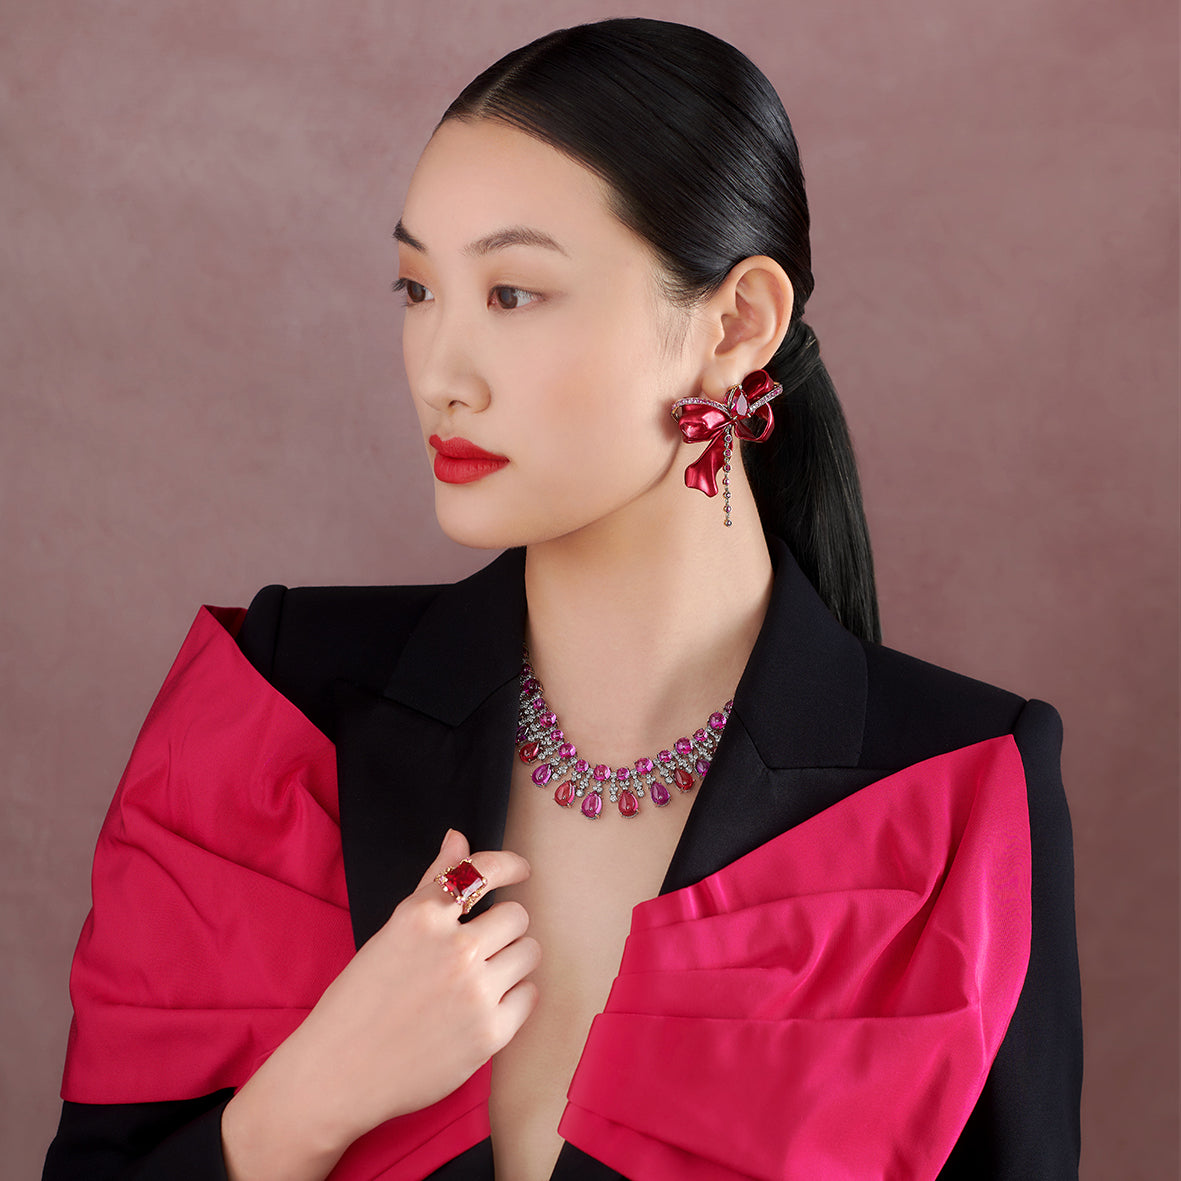 Pomegranate Tutti Frutti Necklace, Faceted, Necklace, Anabela Chan Joaillerie - Fine jewelry with laboratory grown and created gemstones hand-crafted in the United Kingdom. Anabela Chan Joaillerie is the first fine jewellery brand in the world to champion laboratory-grown and created gemstones with high jewellery design, artisanal craftsmanship and a focus on ethical and sustainable innovations.